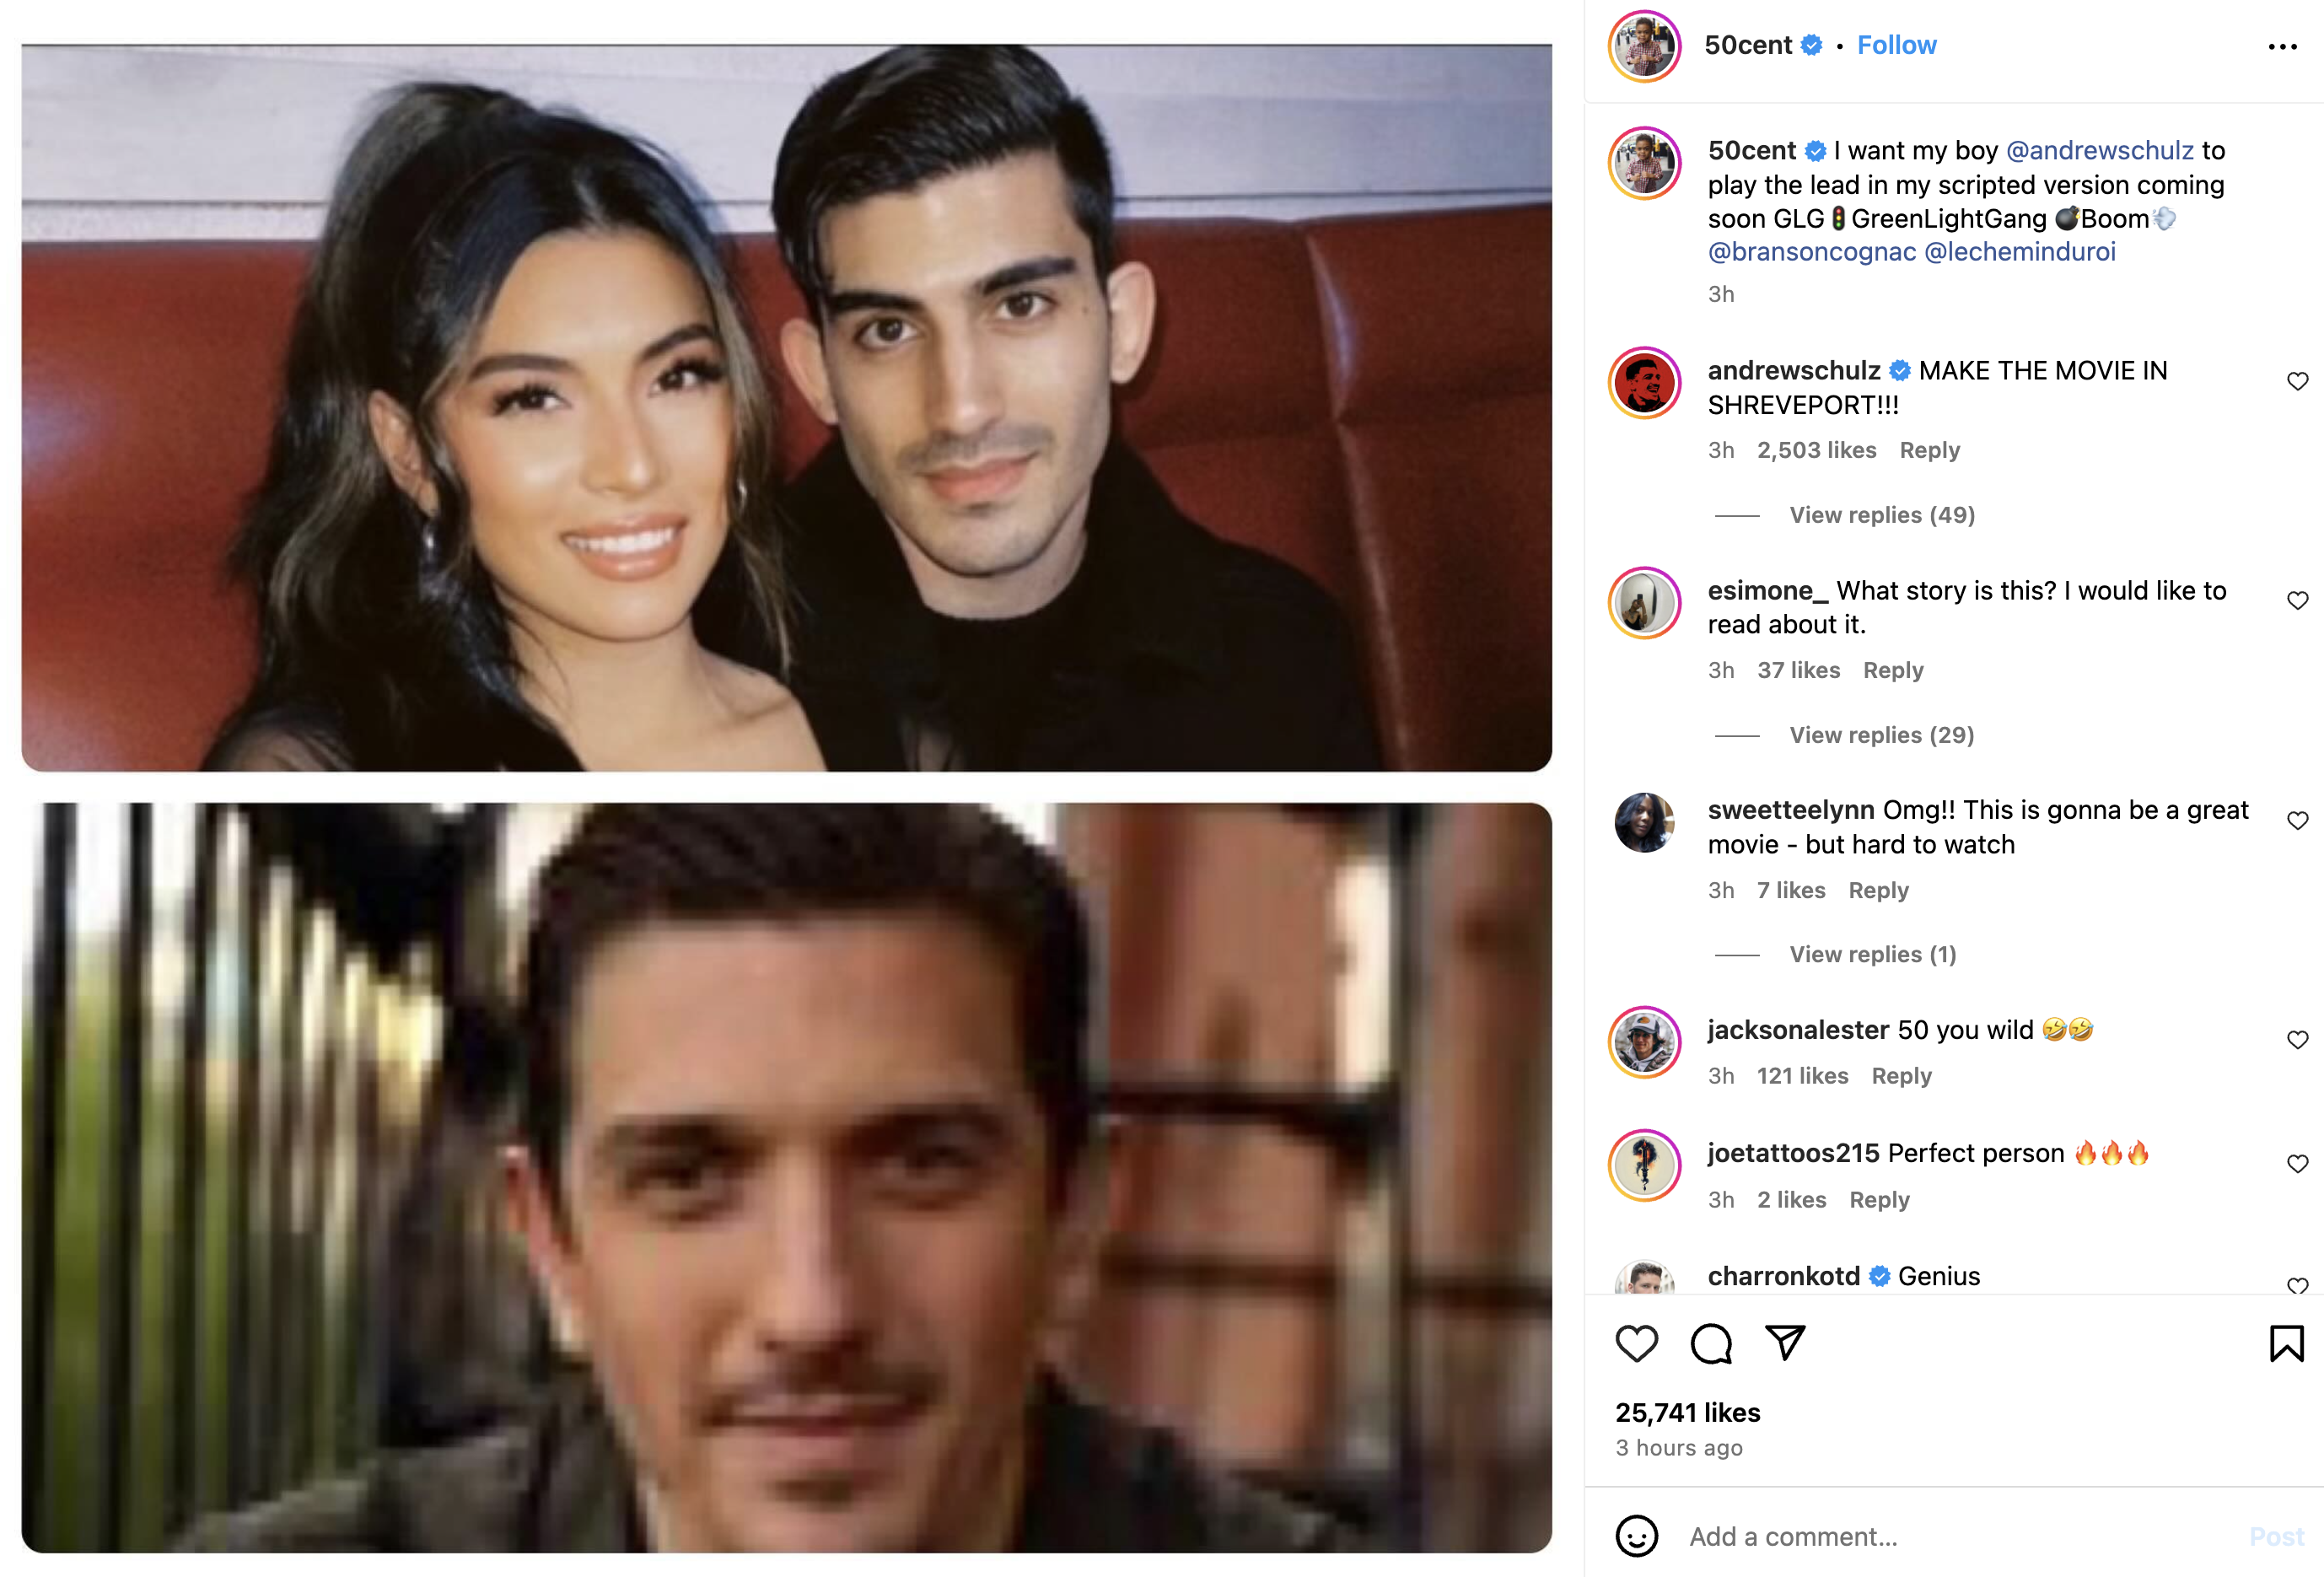 Andrew Schulz and Balqees Fathi smiling together in a close-up photo. Below, Andrew Schulz is seen in another close-up shot